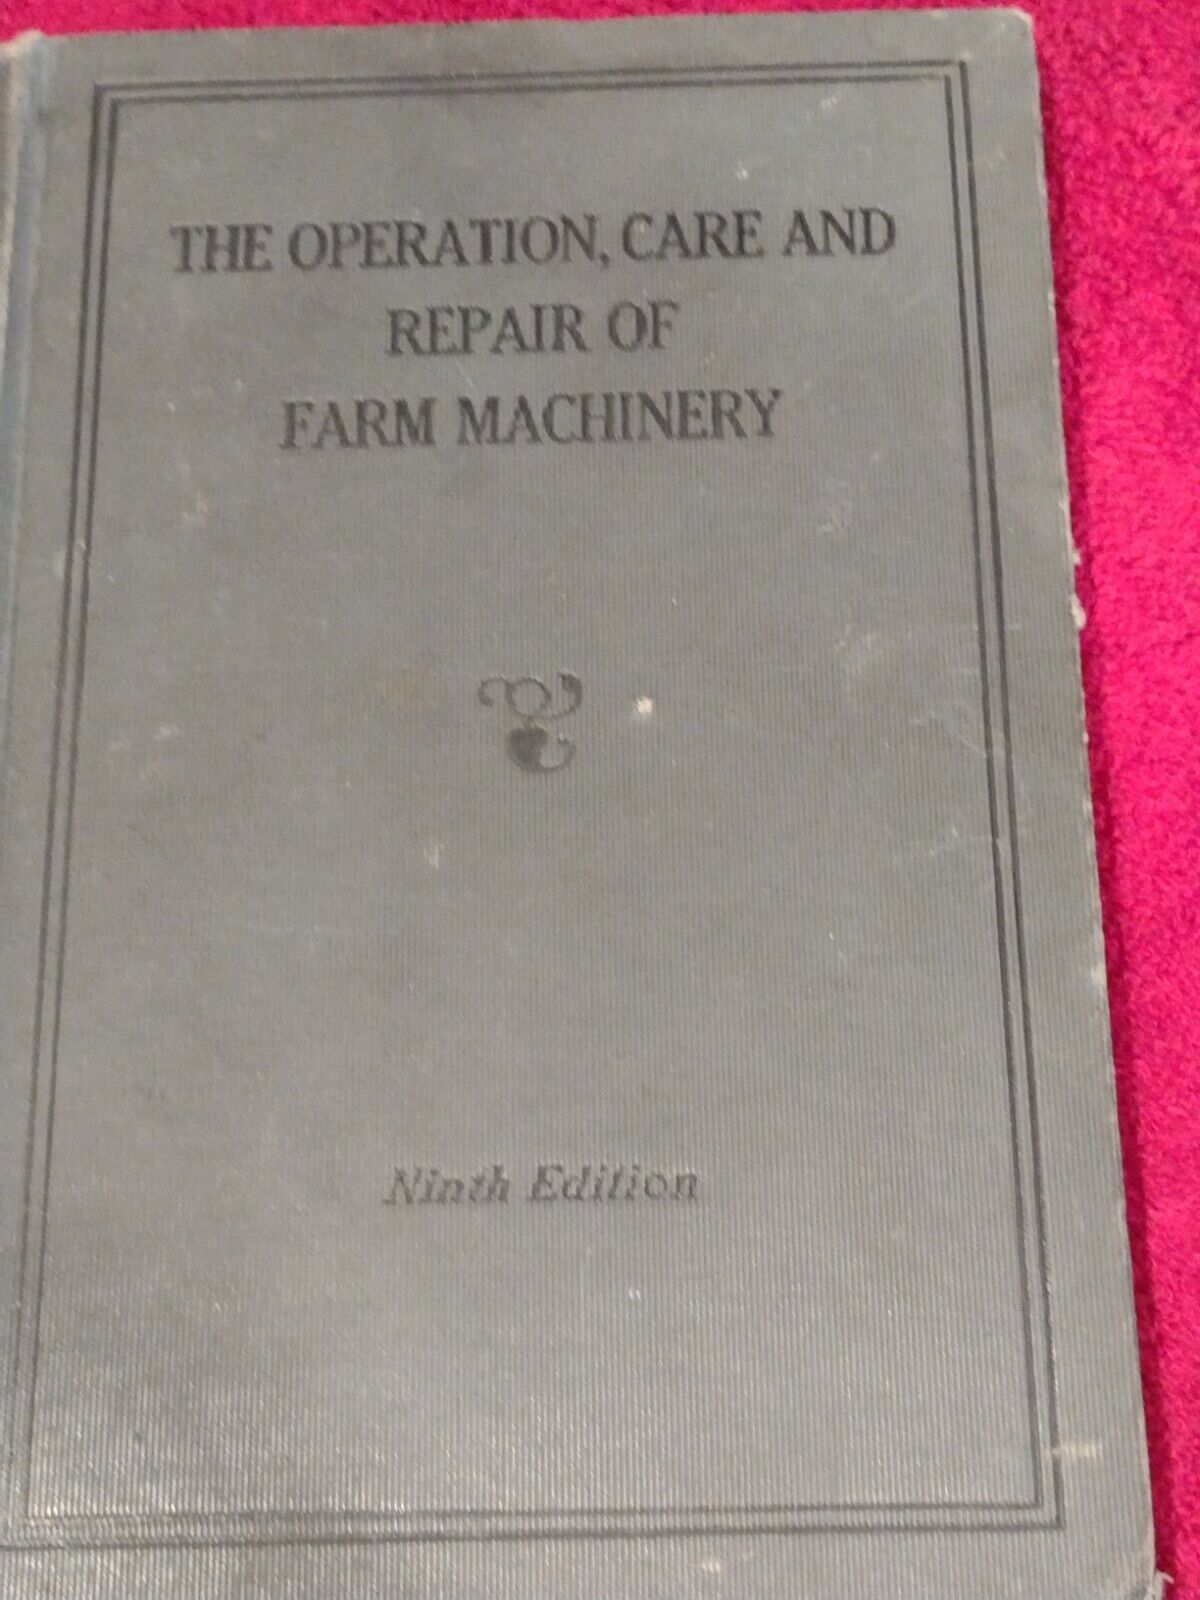 The Operation, Care And Repair Of Farm Machinery. Ninth Edition